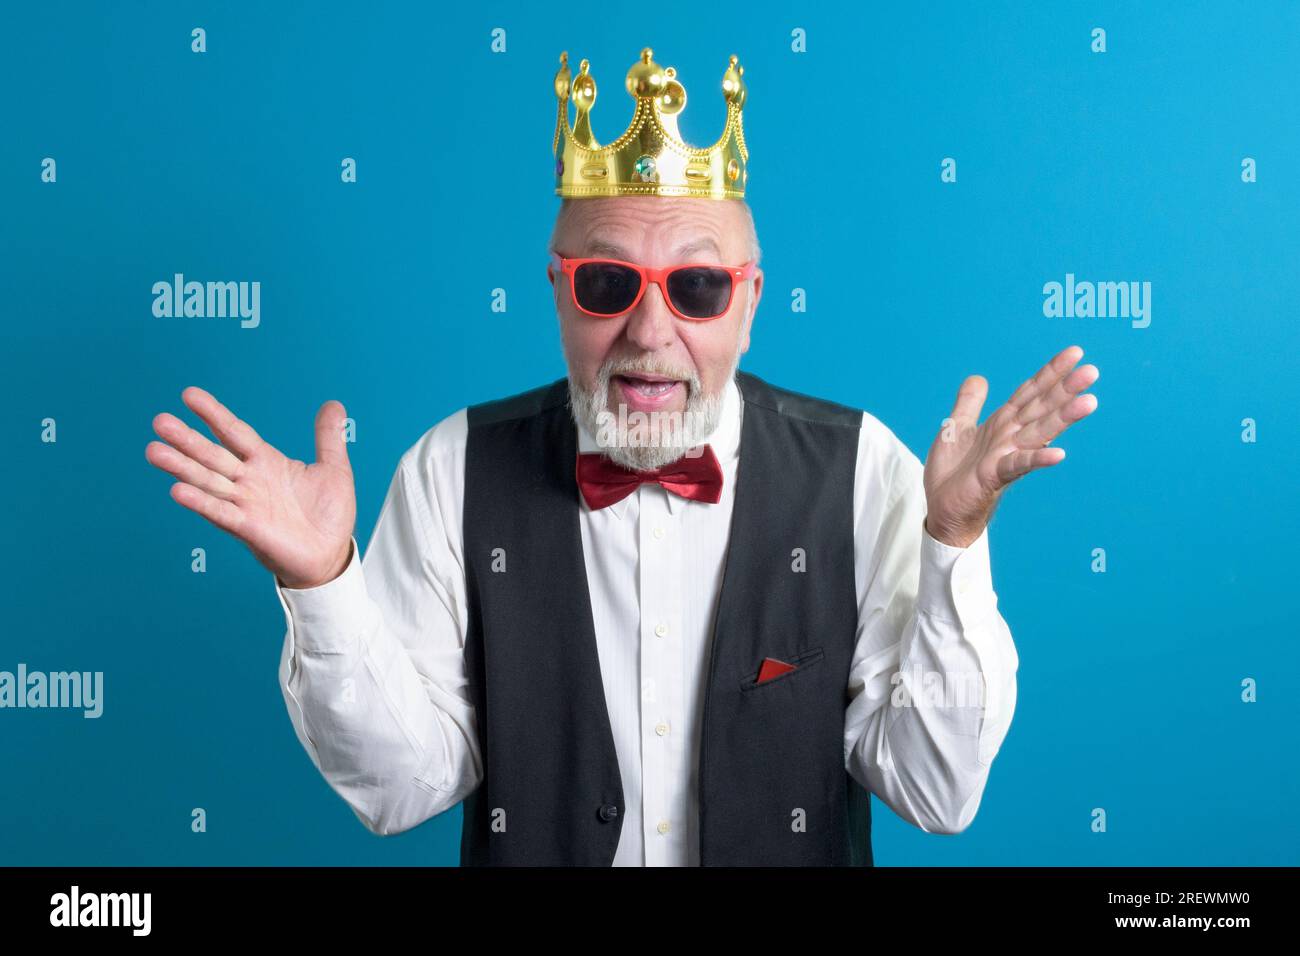 Funny old man in a festive suit with a bow tie and a golden crown on his head Stock Photo